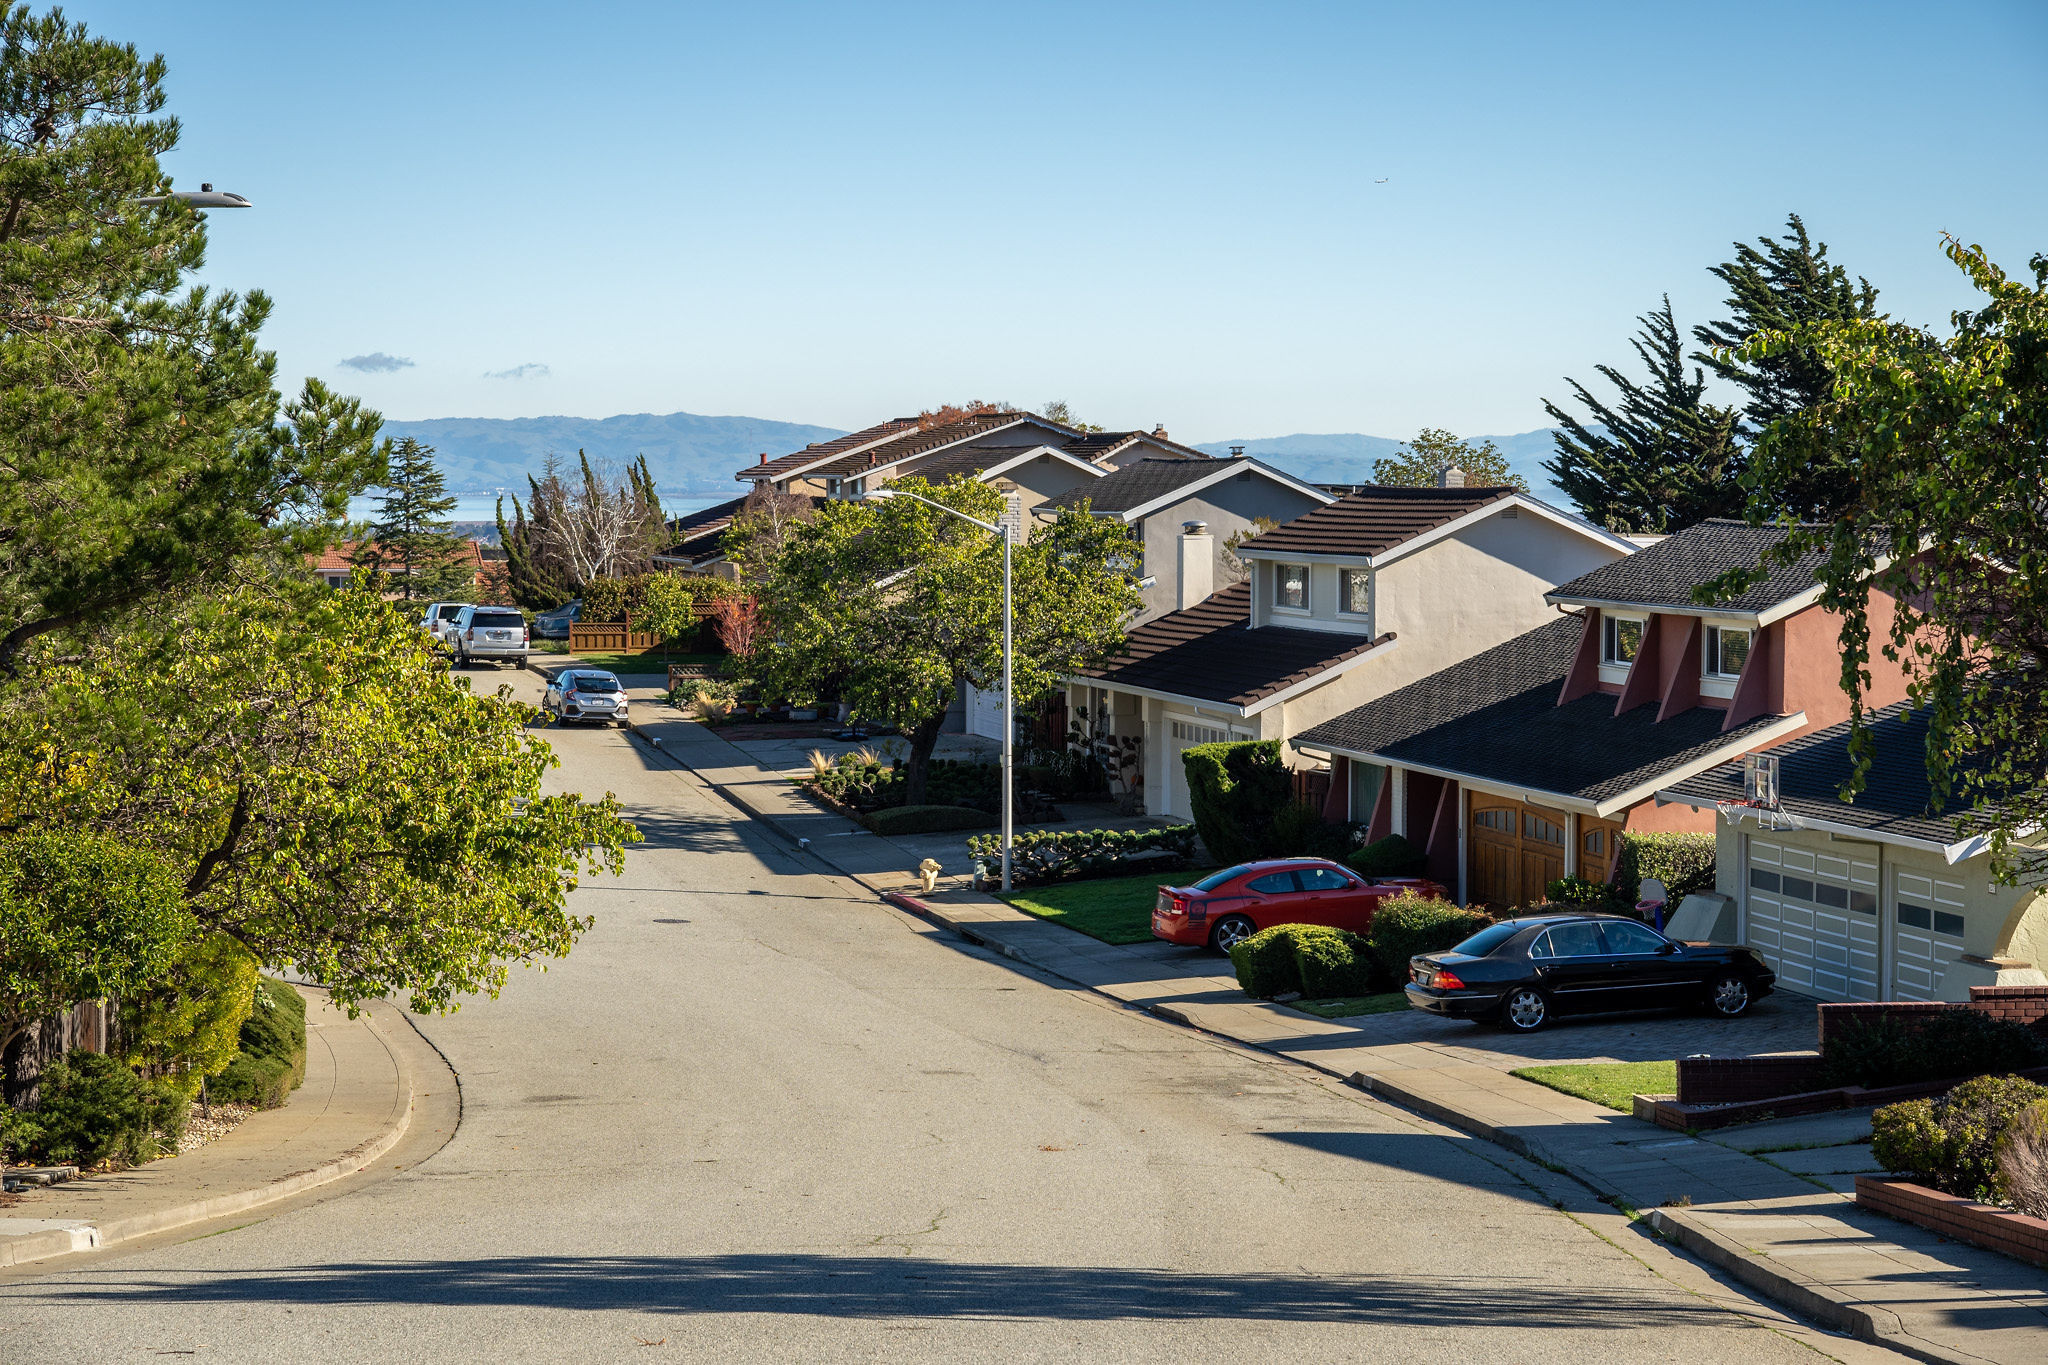 View of the houses within the neighborhood in San Mateo.